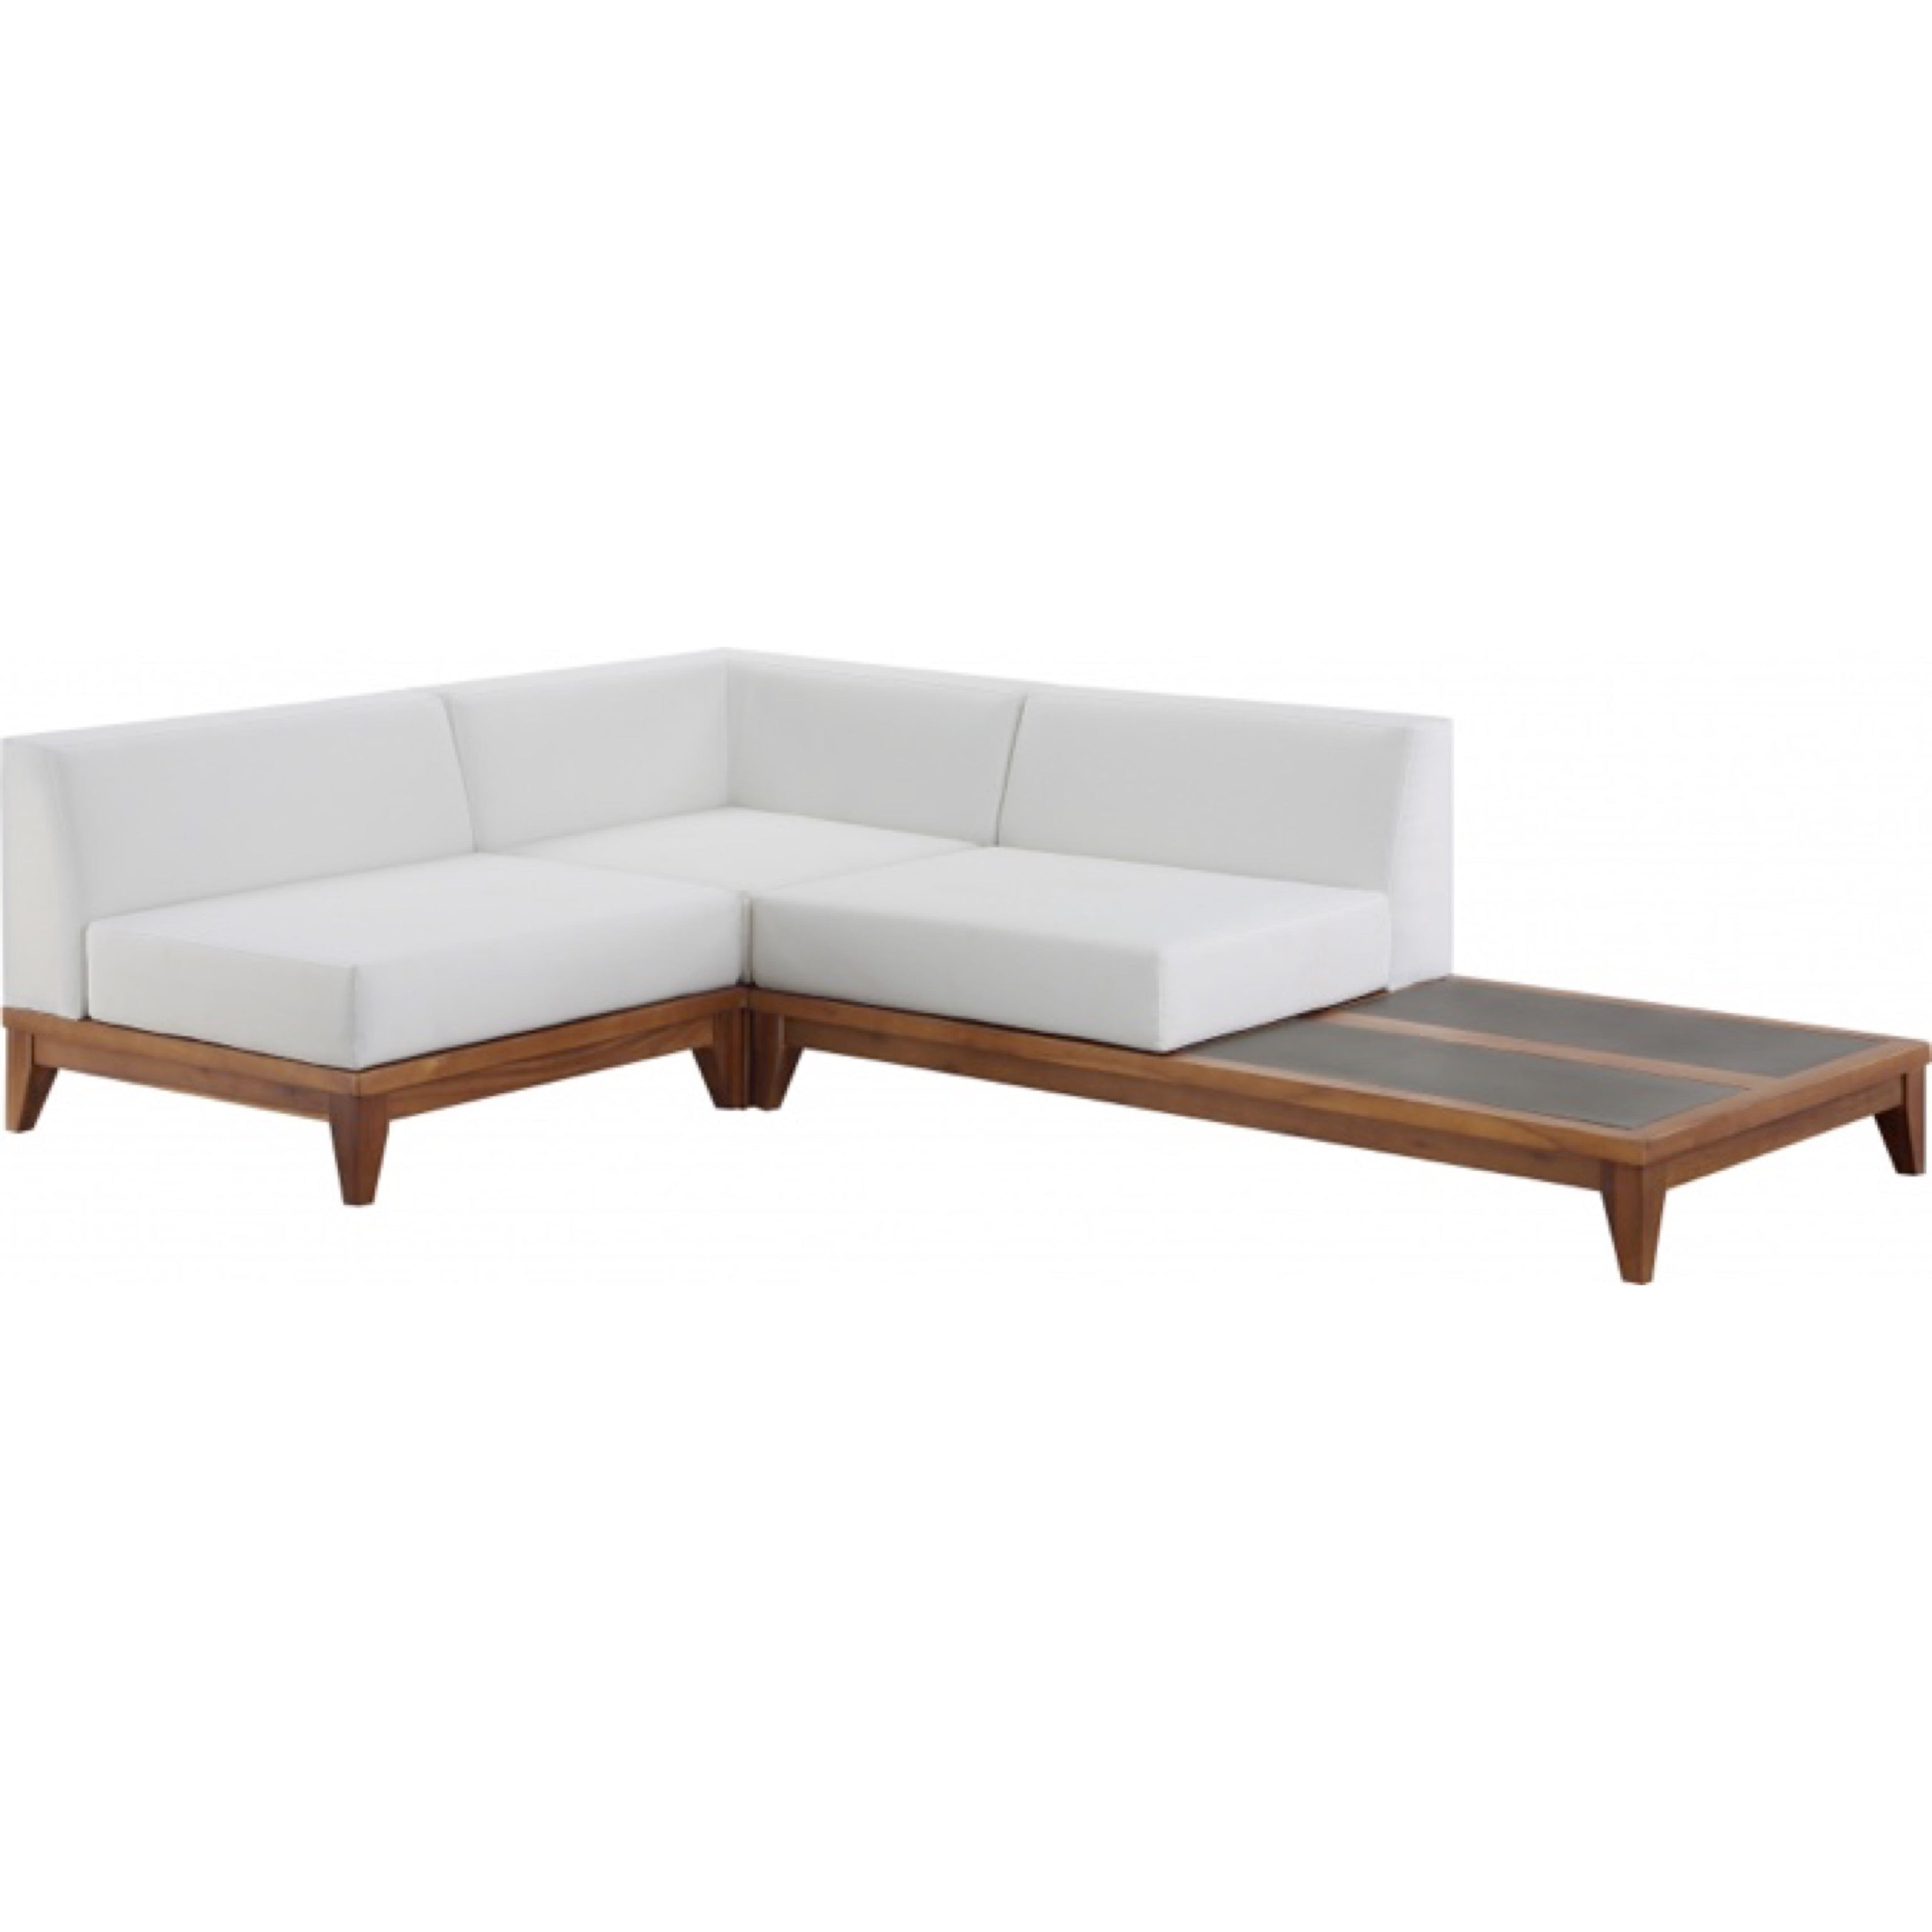 RIO WATERPROOF MODULAR 3 PIECE INTEGRATED TABLE OUTDOOR SECTIONAL